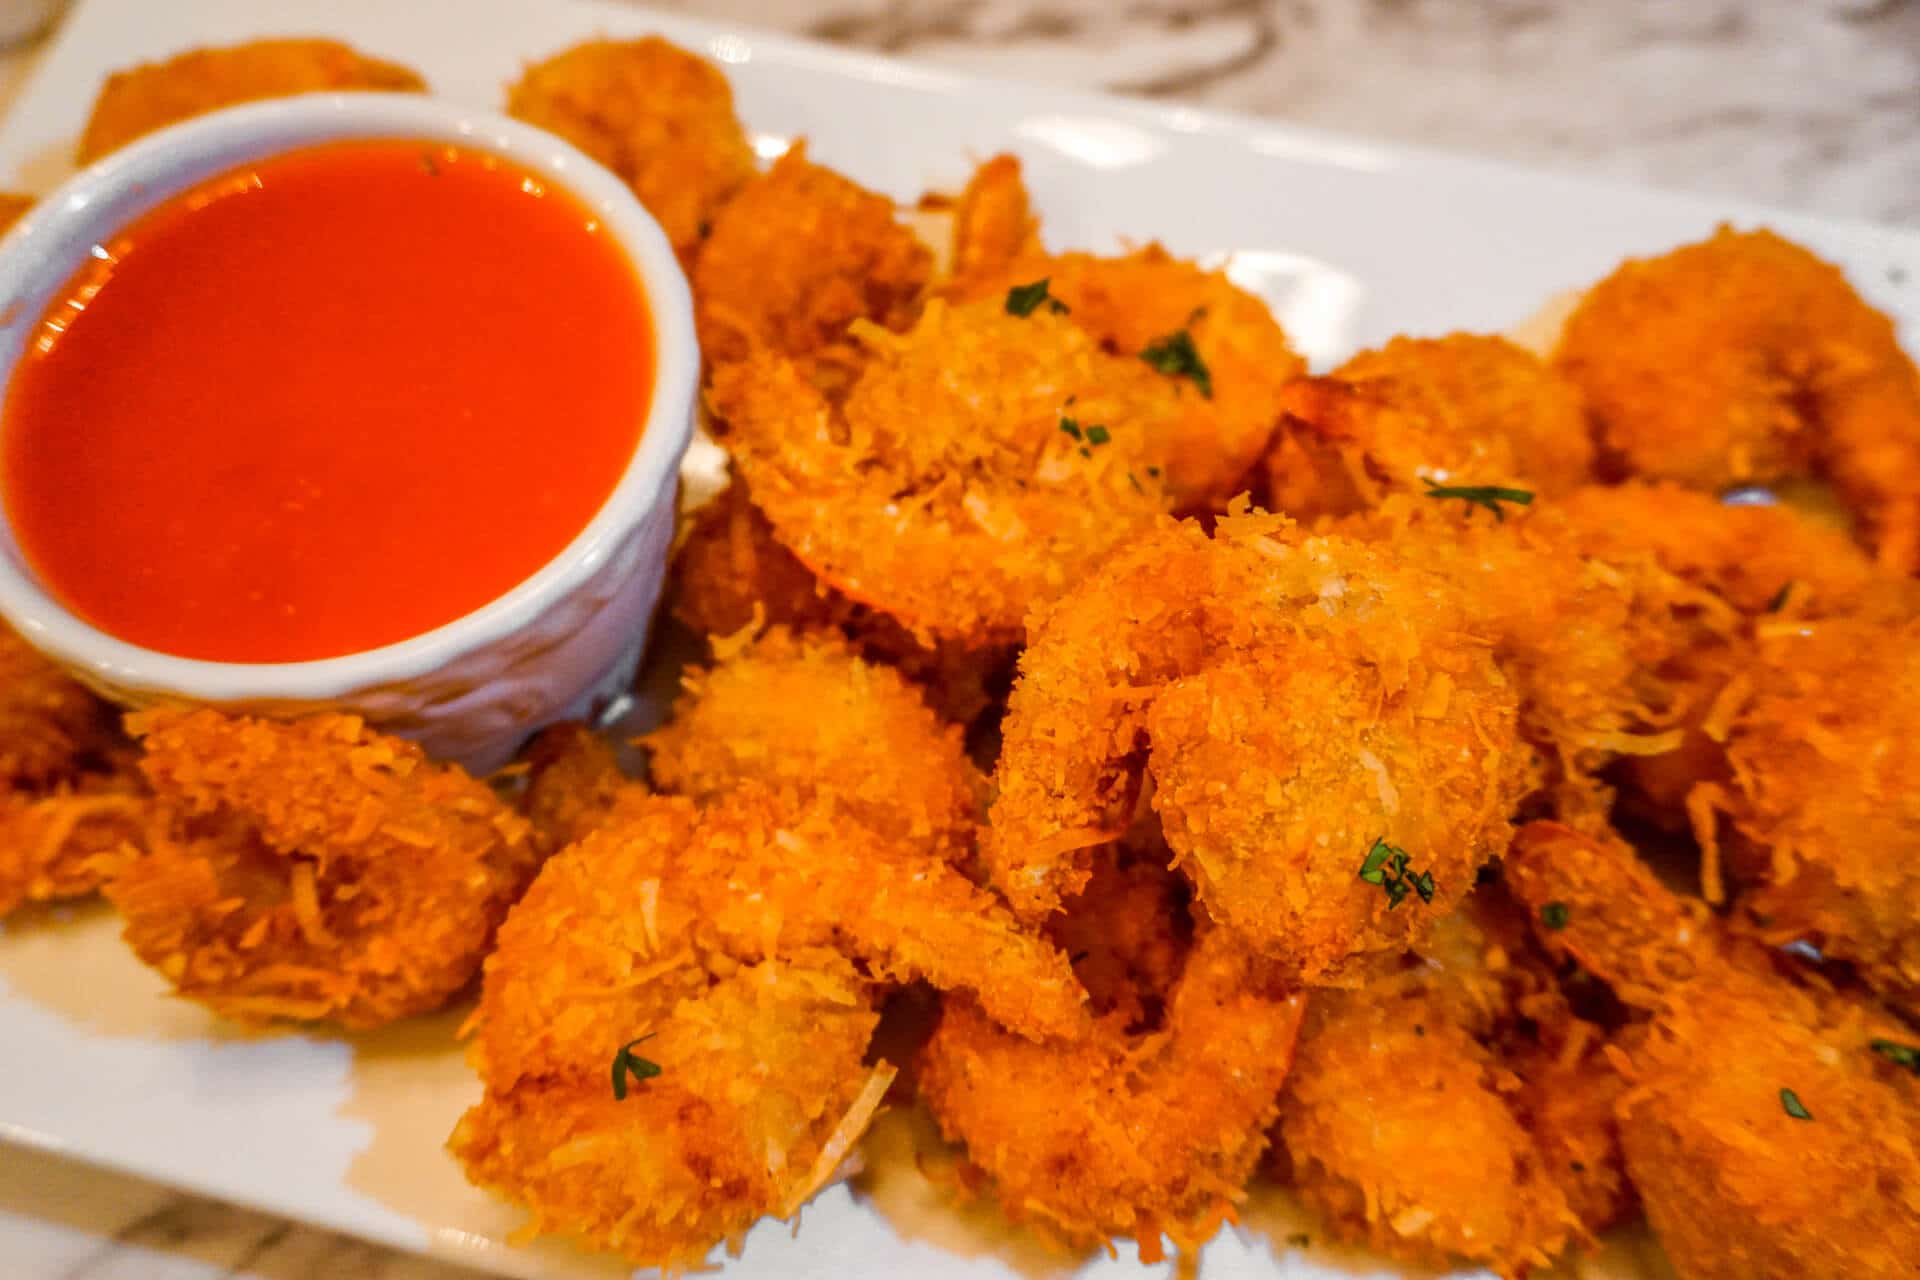 Coconut Shrimp (Fried + Air Fryer) with a Sweet Red Bell Pepper Chili Sauce